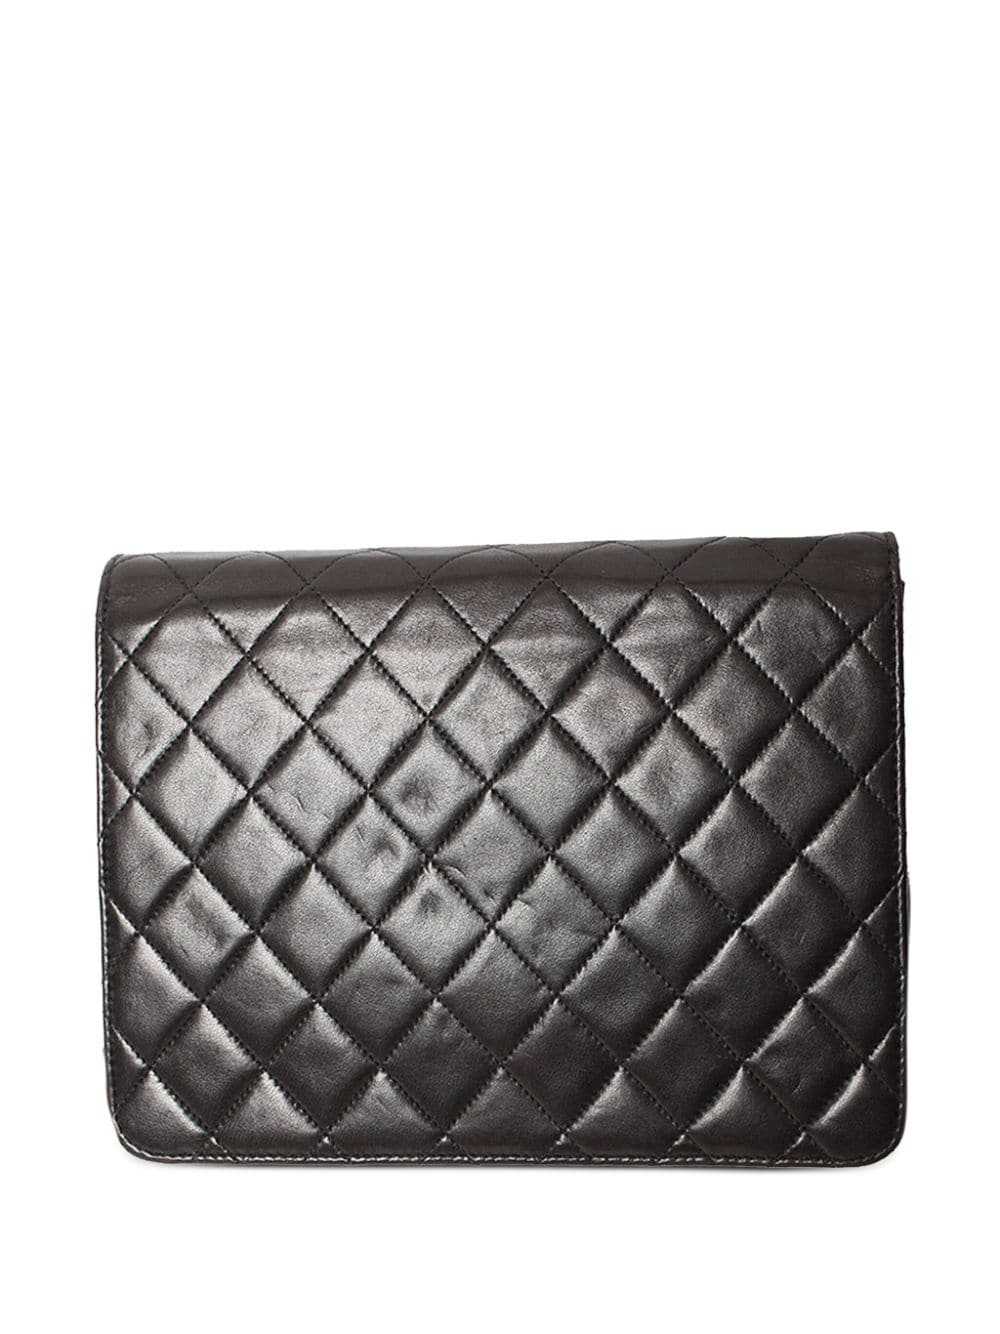 CHANEL Pre-Owned 1996-1997 CC diamond-quilted sho… - image 2